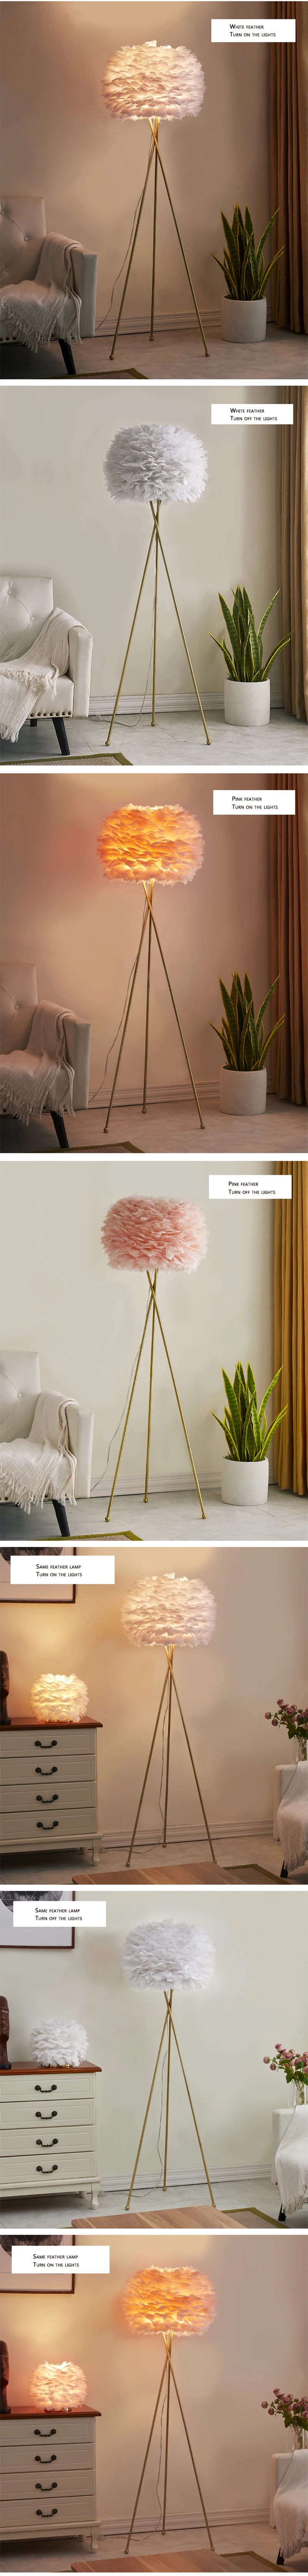 Stand Light arts 1.8 meter Height 65pcs Ostrich Feathers Copper Floor Lamp corridor exhibition hall decorative lamp